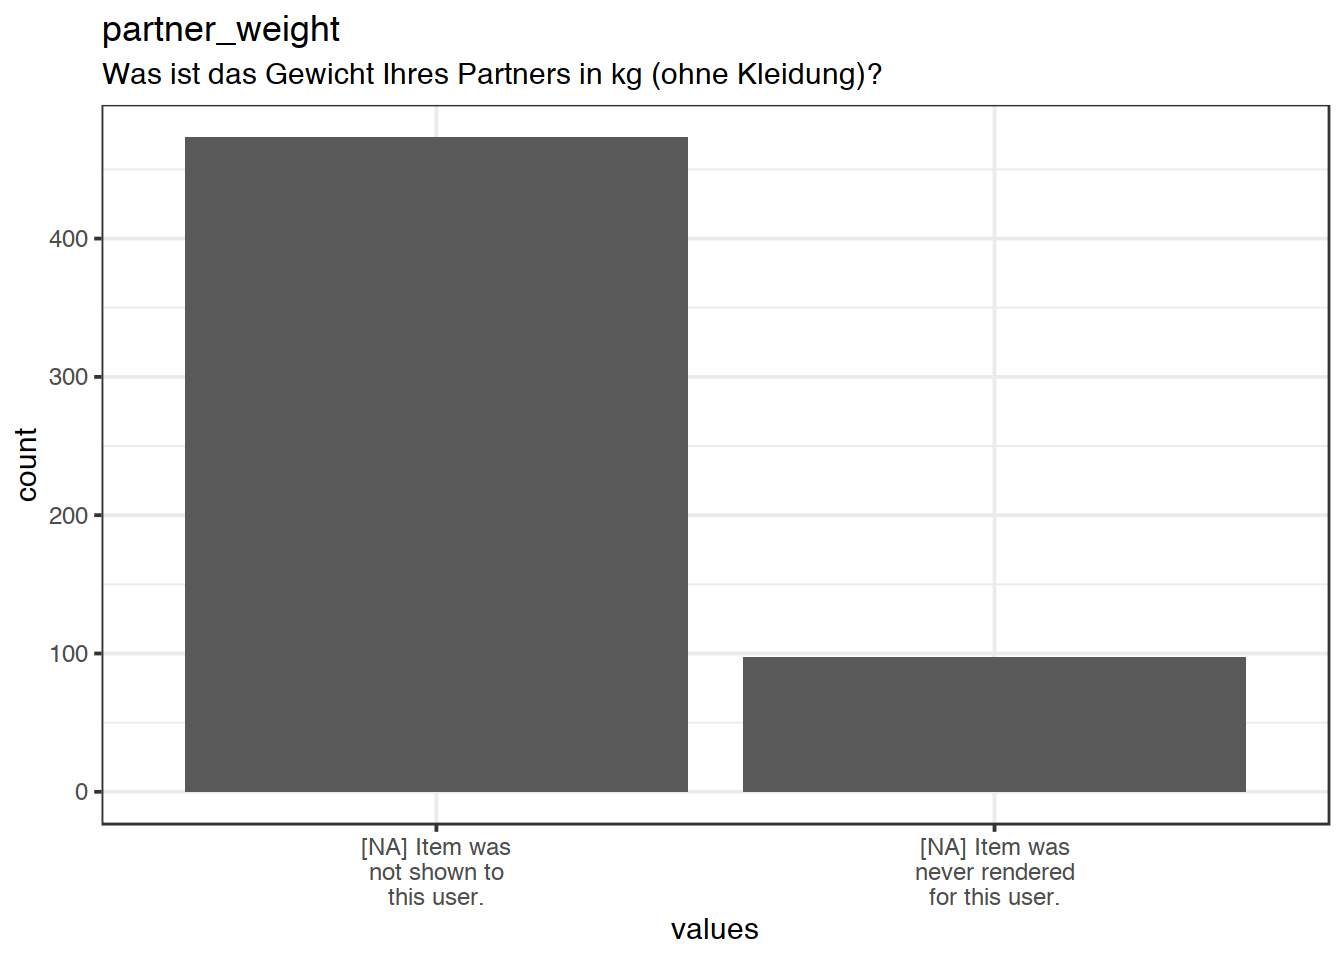 Plot of missing values for partner_weight